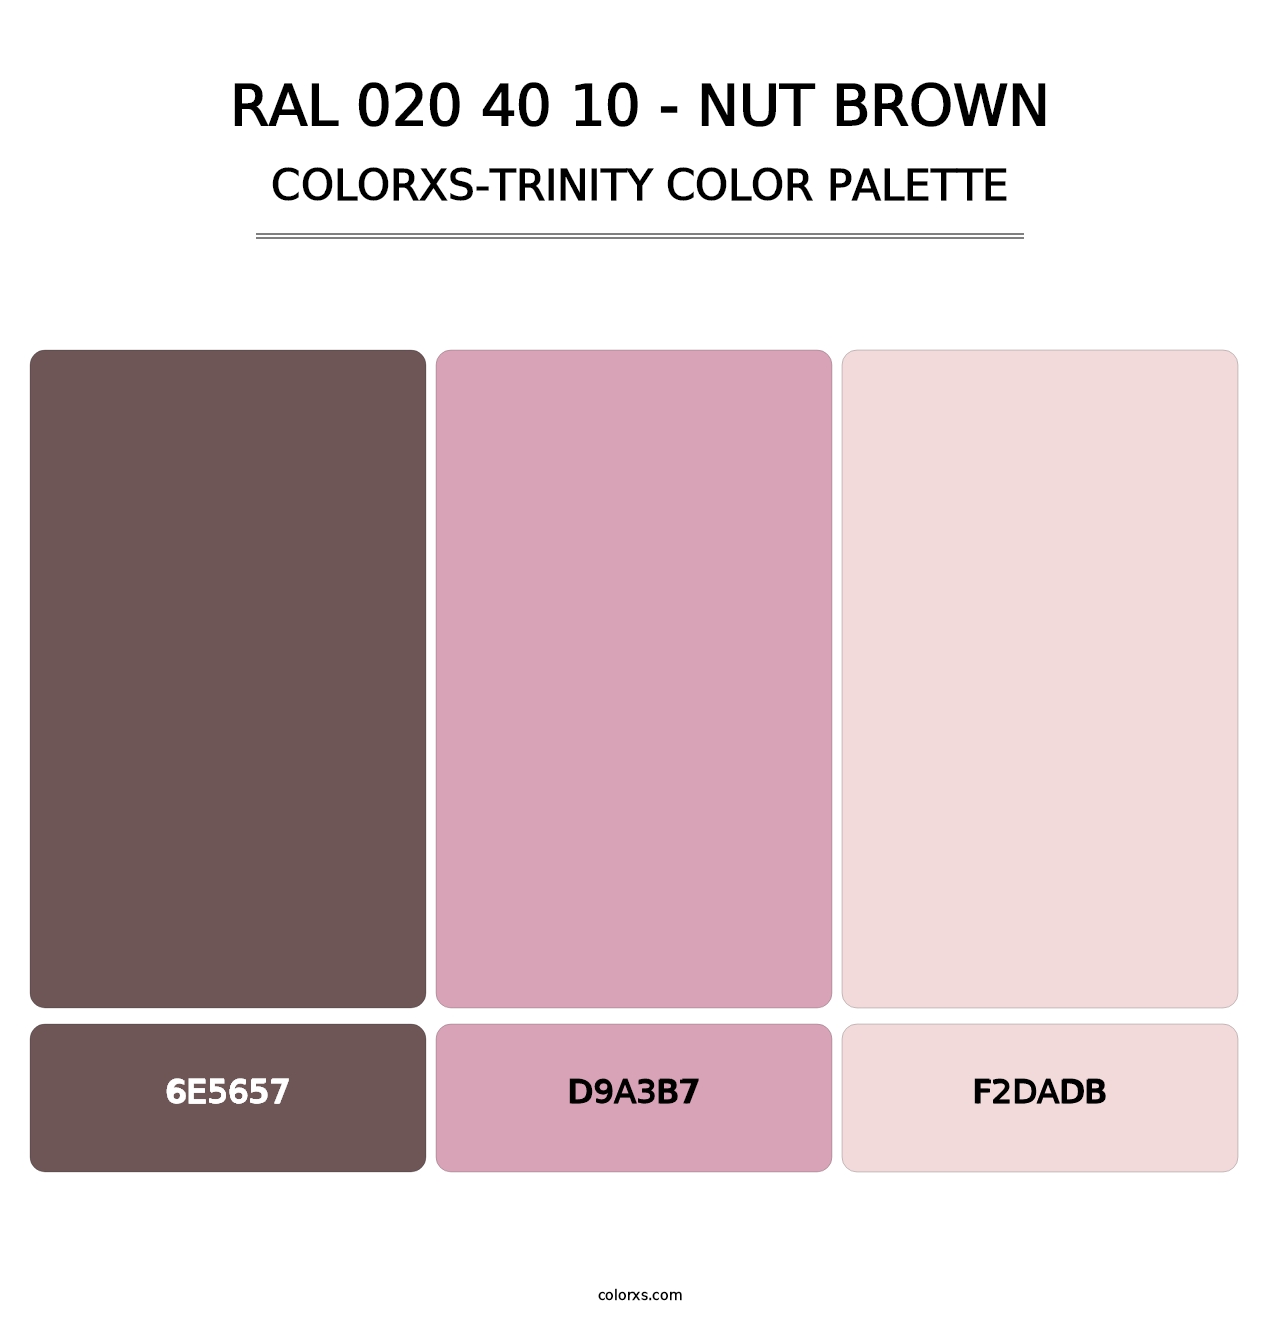 RAL 020 40 10 - Nut Brown - Colorxs Trinity Palette